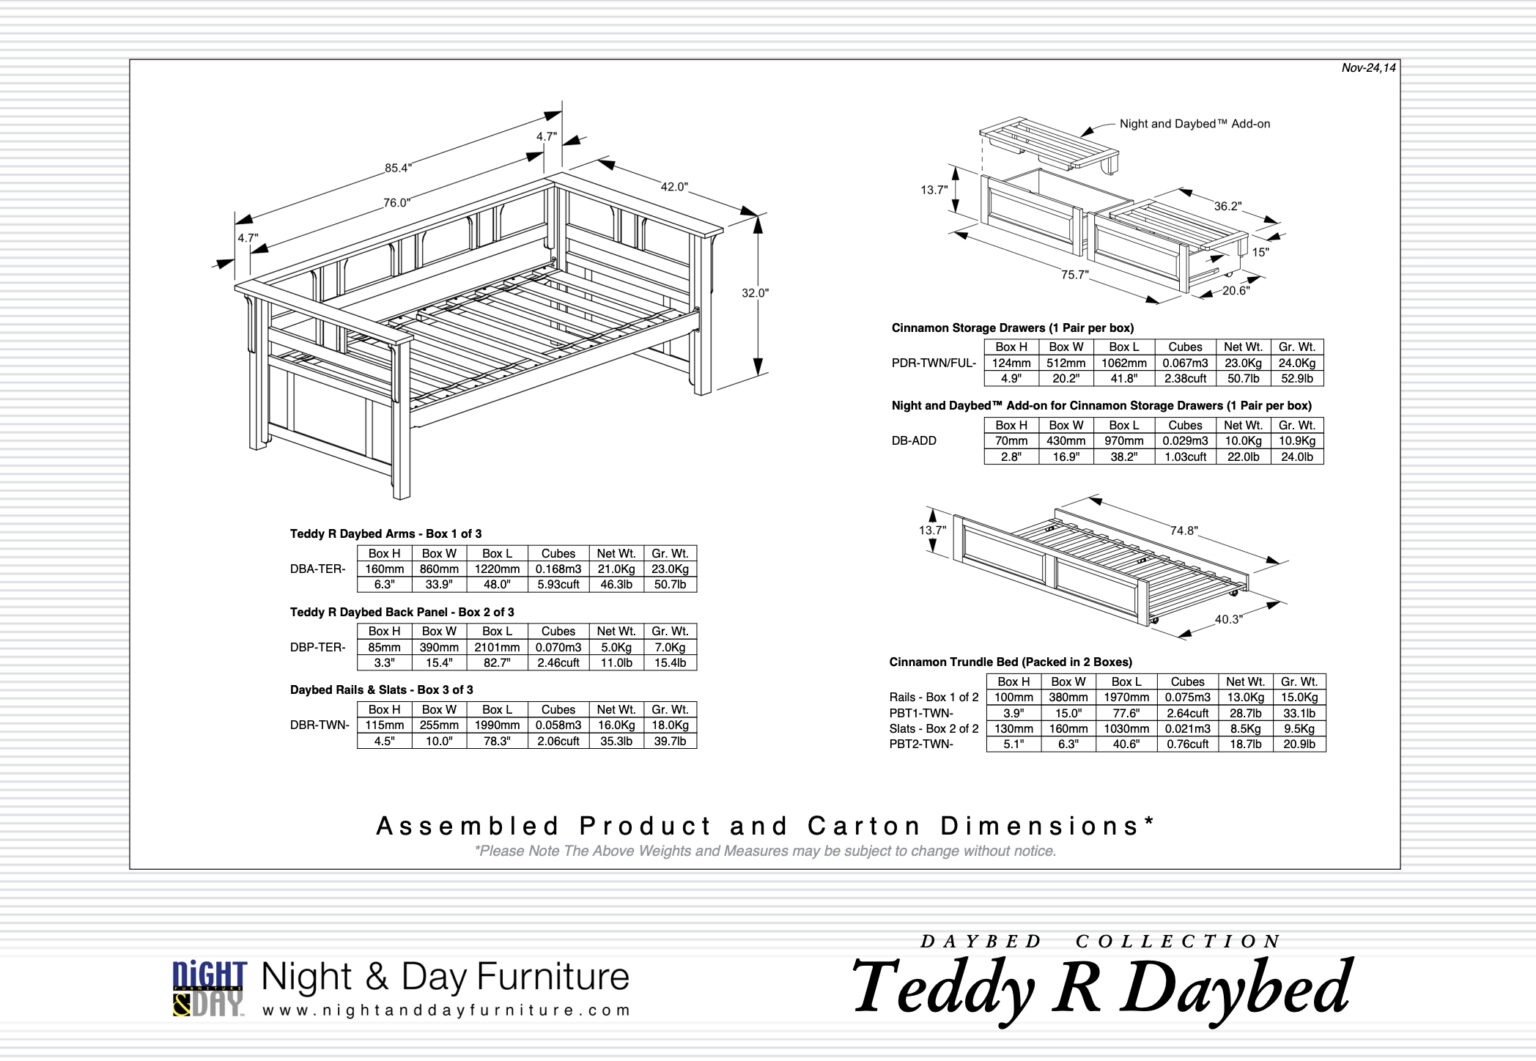 Teddy-Roosevelt-Daybed-Dimensions_night-and-day-furniture